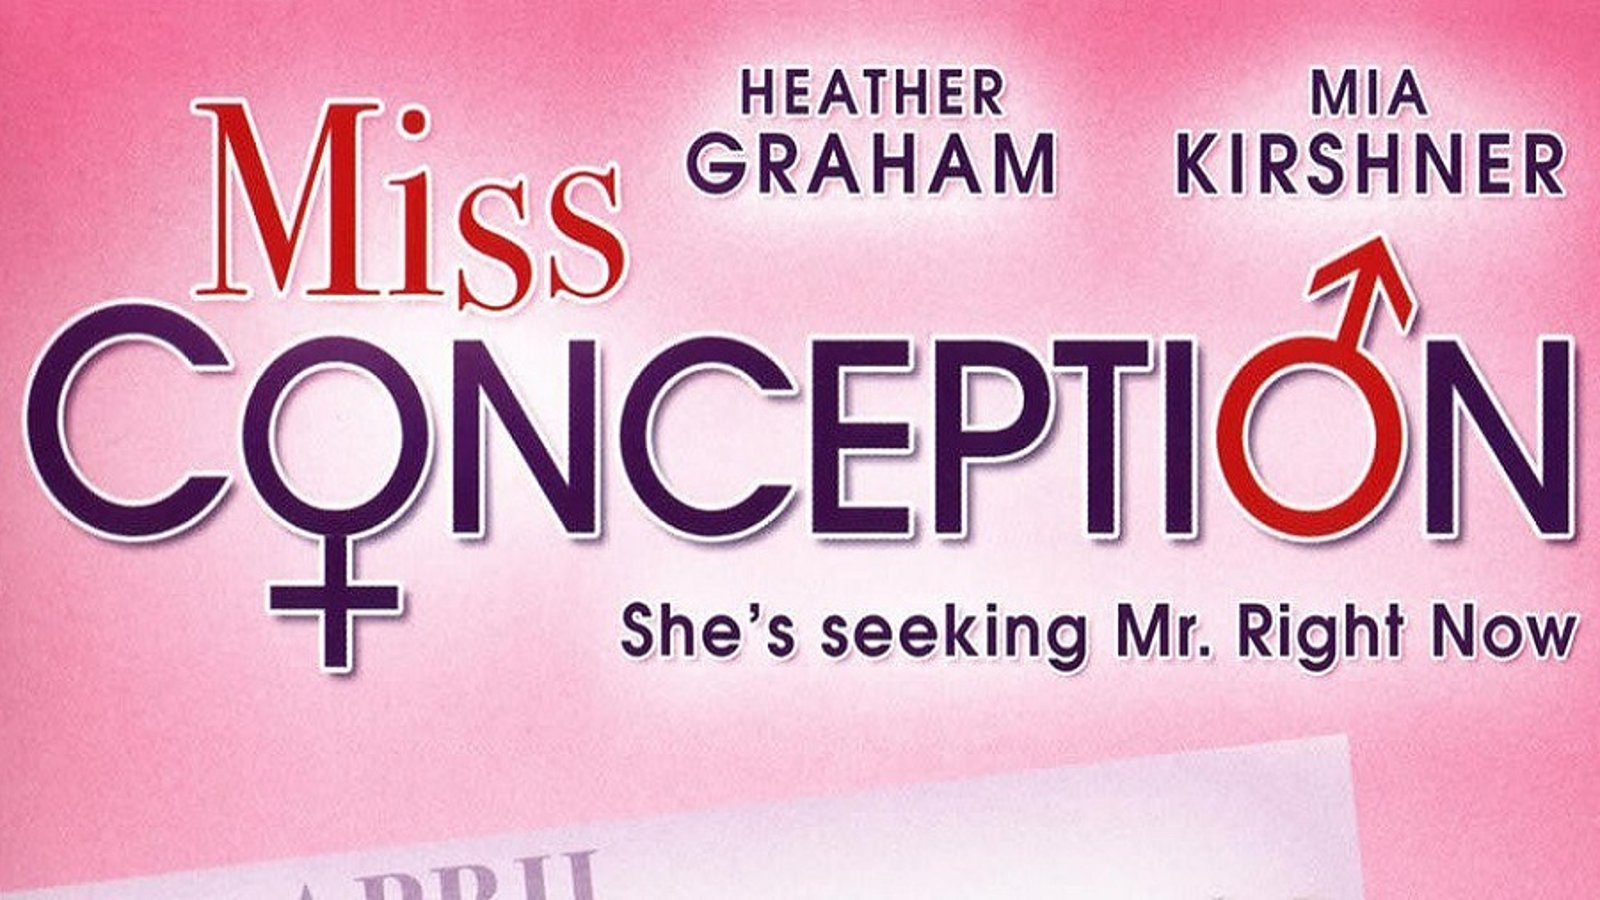 Miss Conception